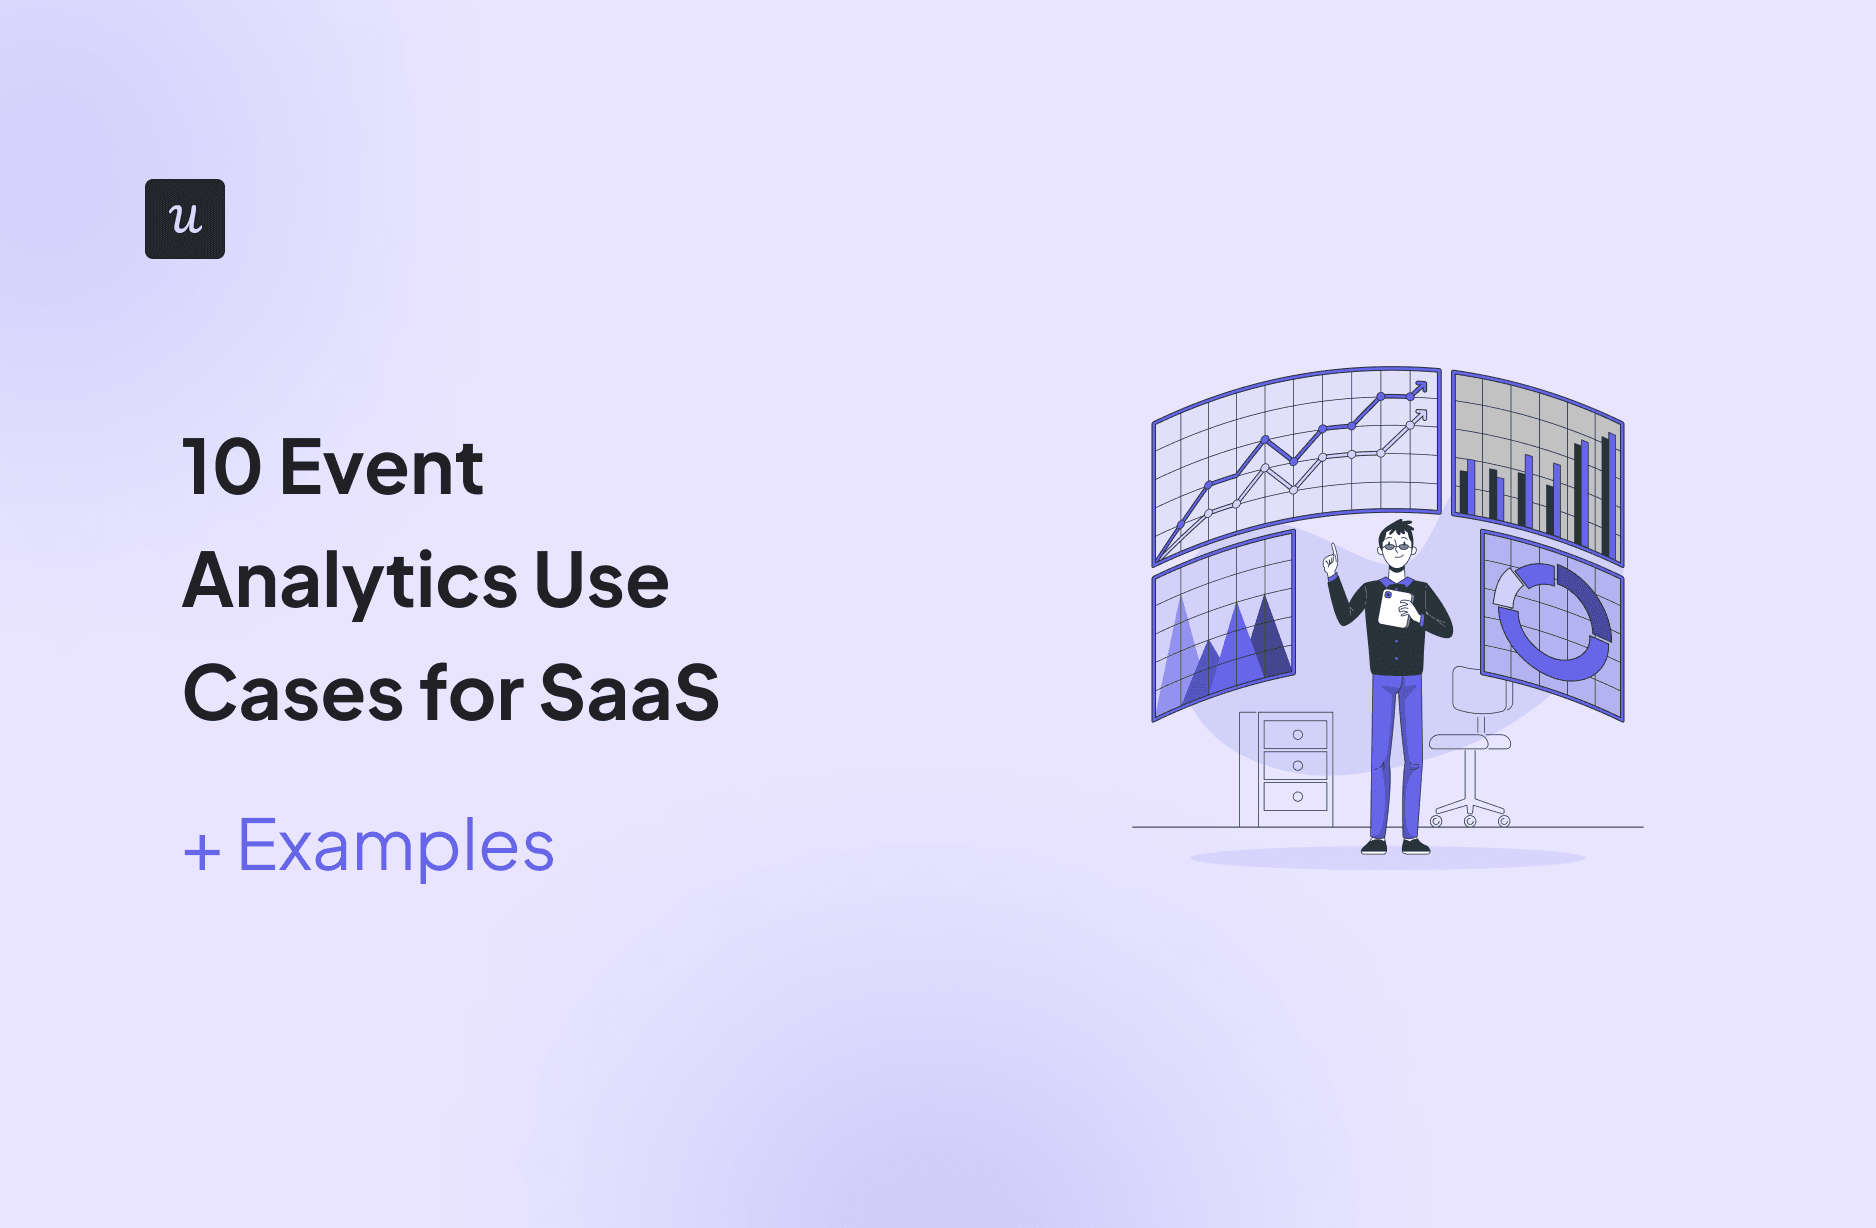 10 Event Analytics Use Cases for SaaS [+ Examples] cover